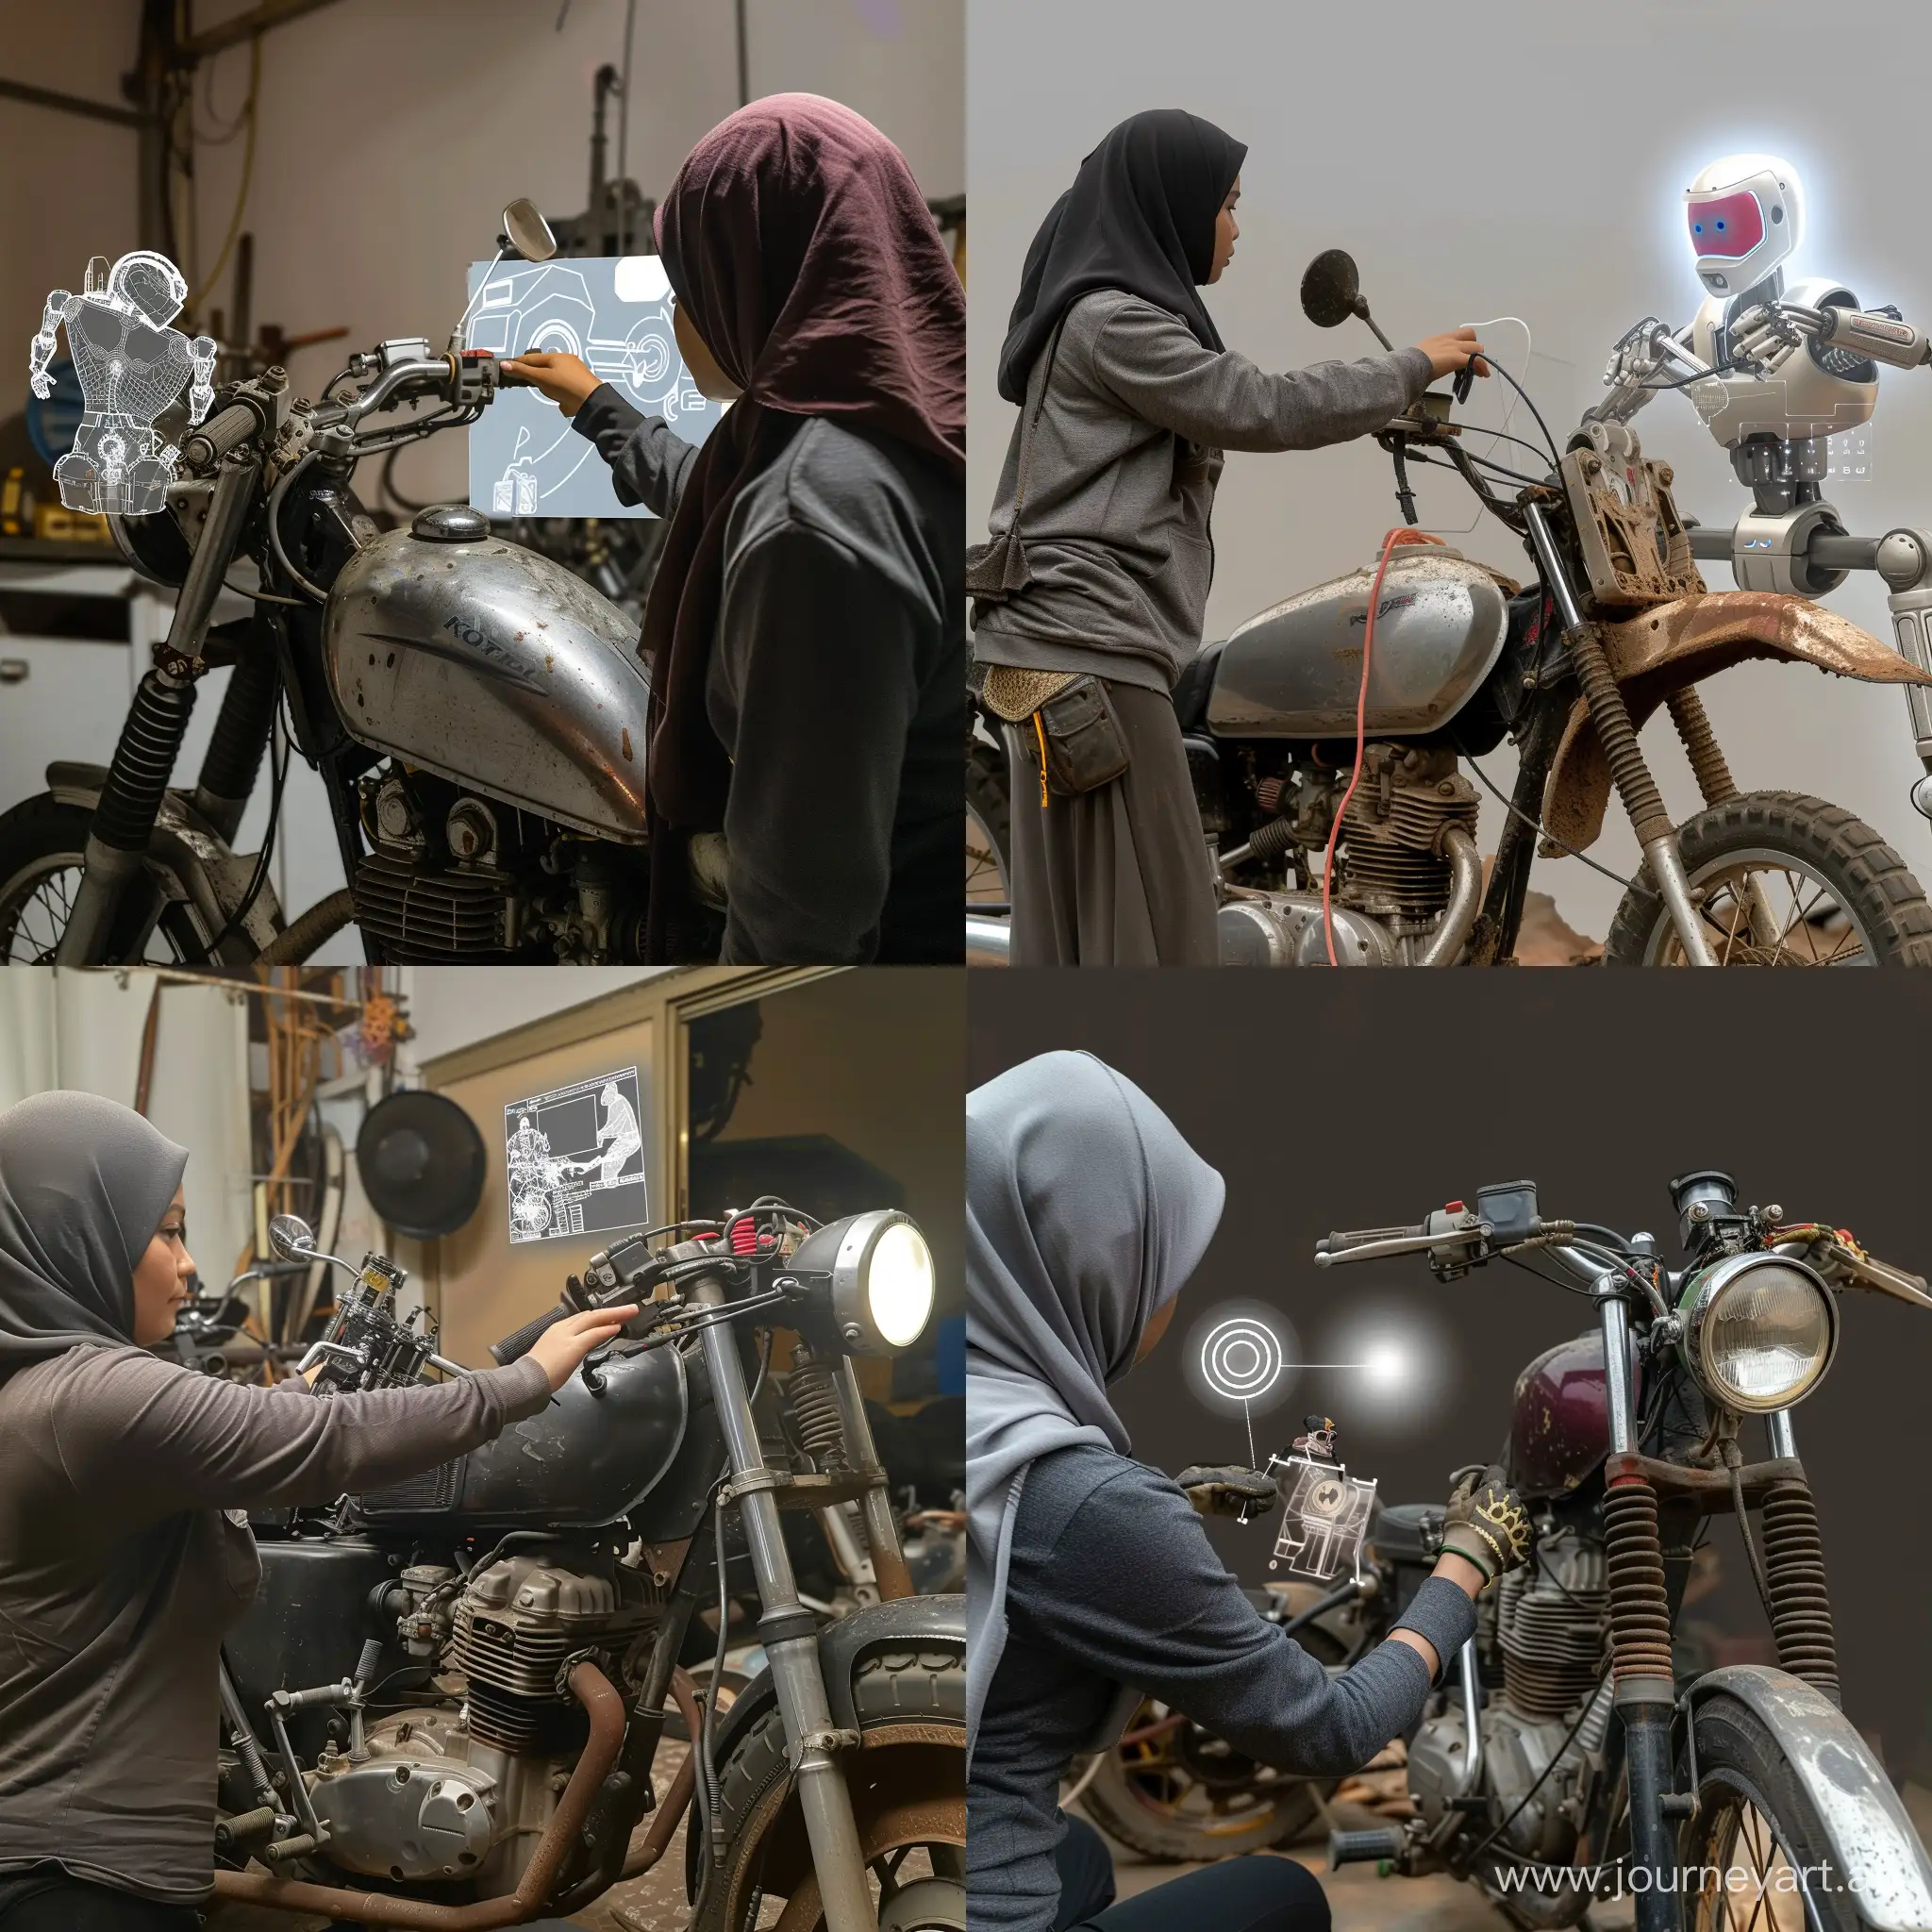 Malay-Woman-in-Hijab-Fixing-Motorcycle-with-Robot-Assistant